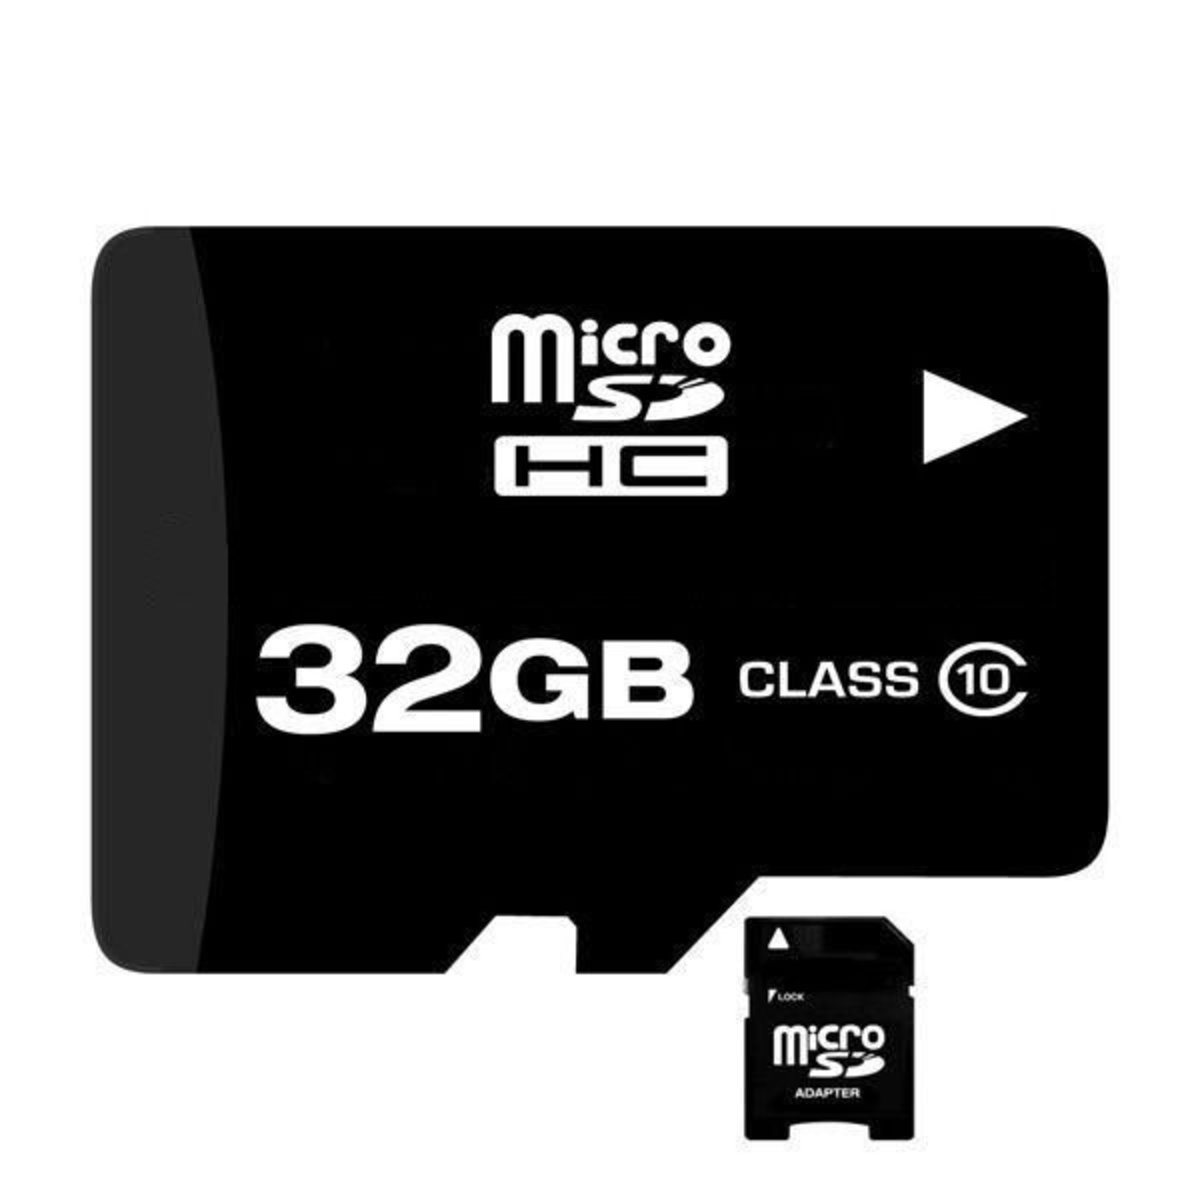 How to test for a fake micro sdhc using h2testw?